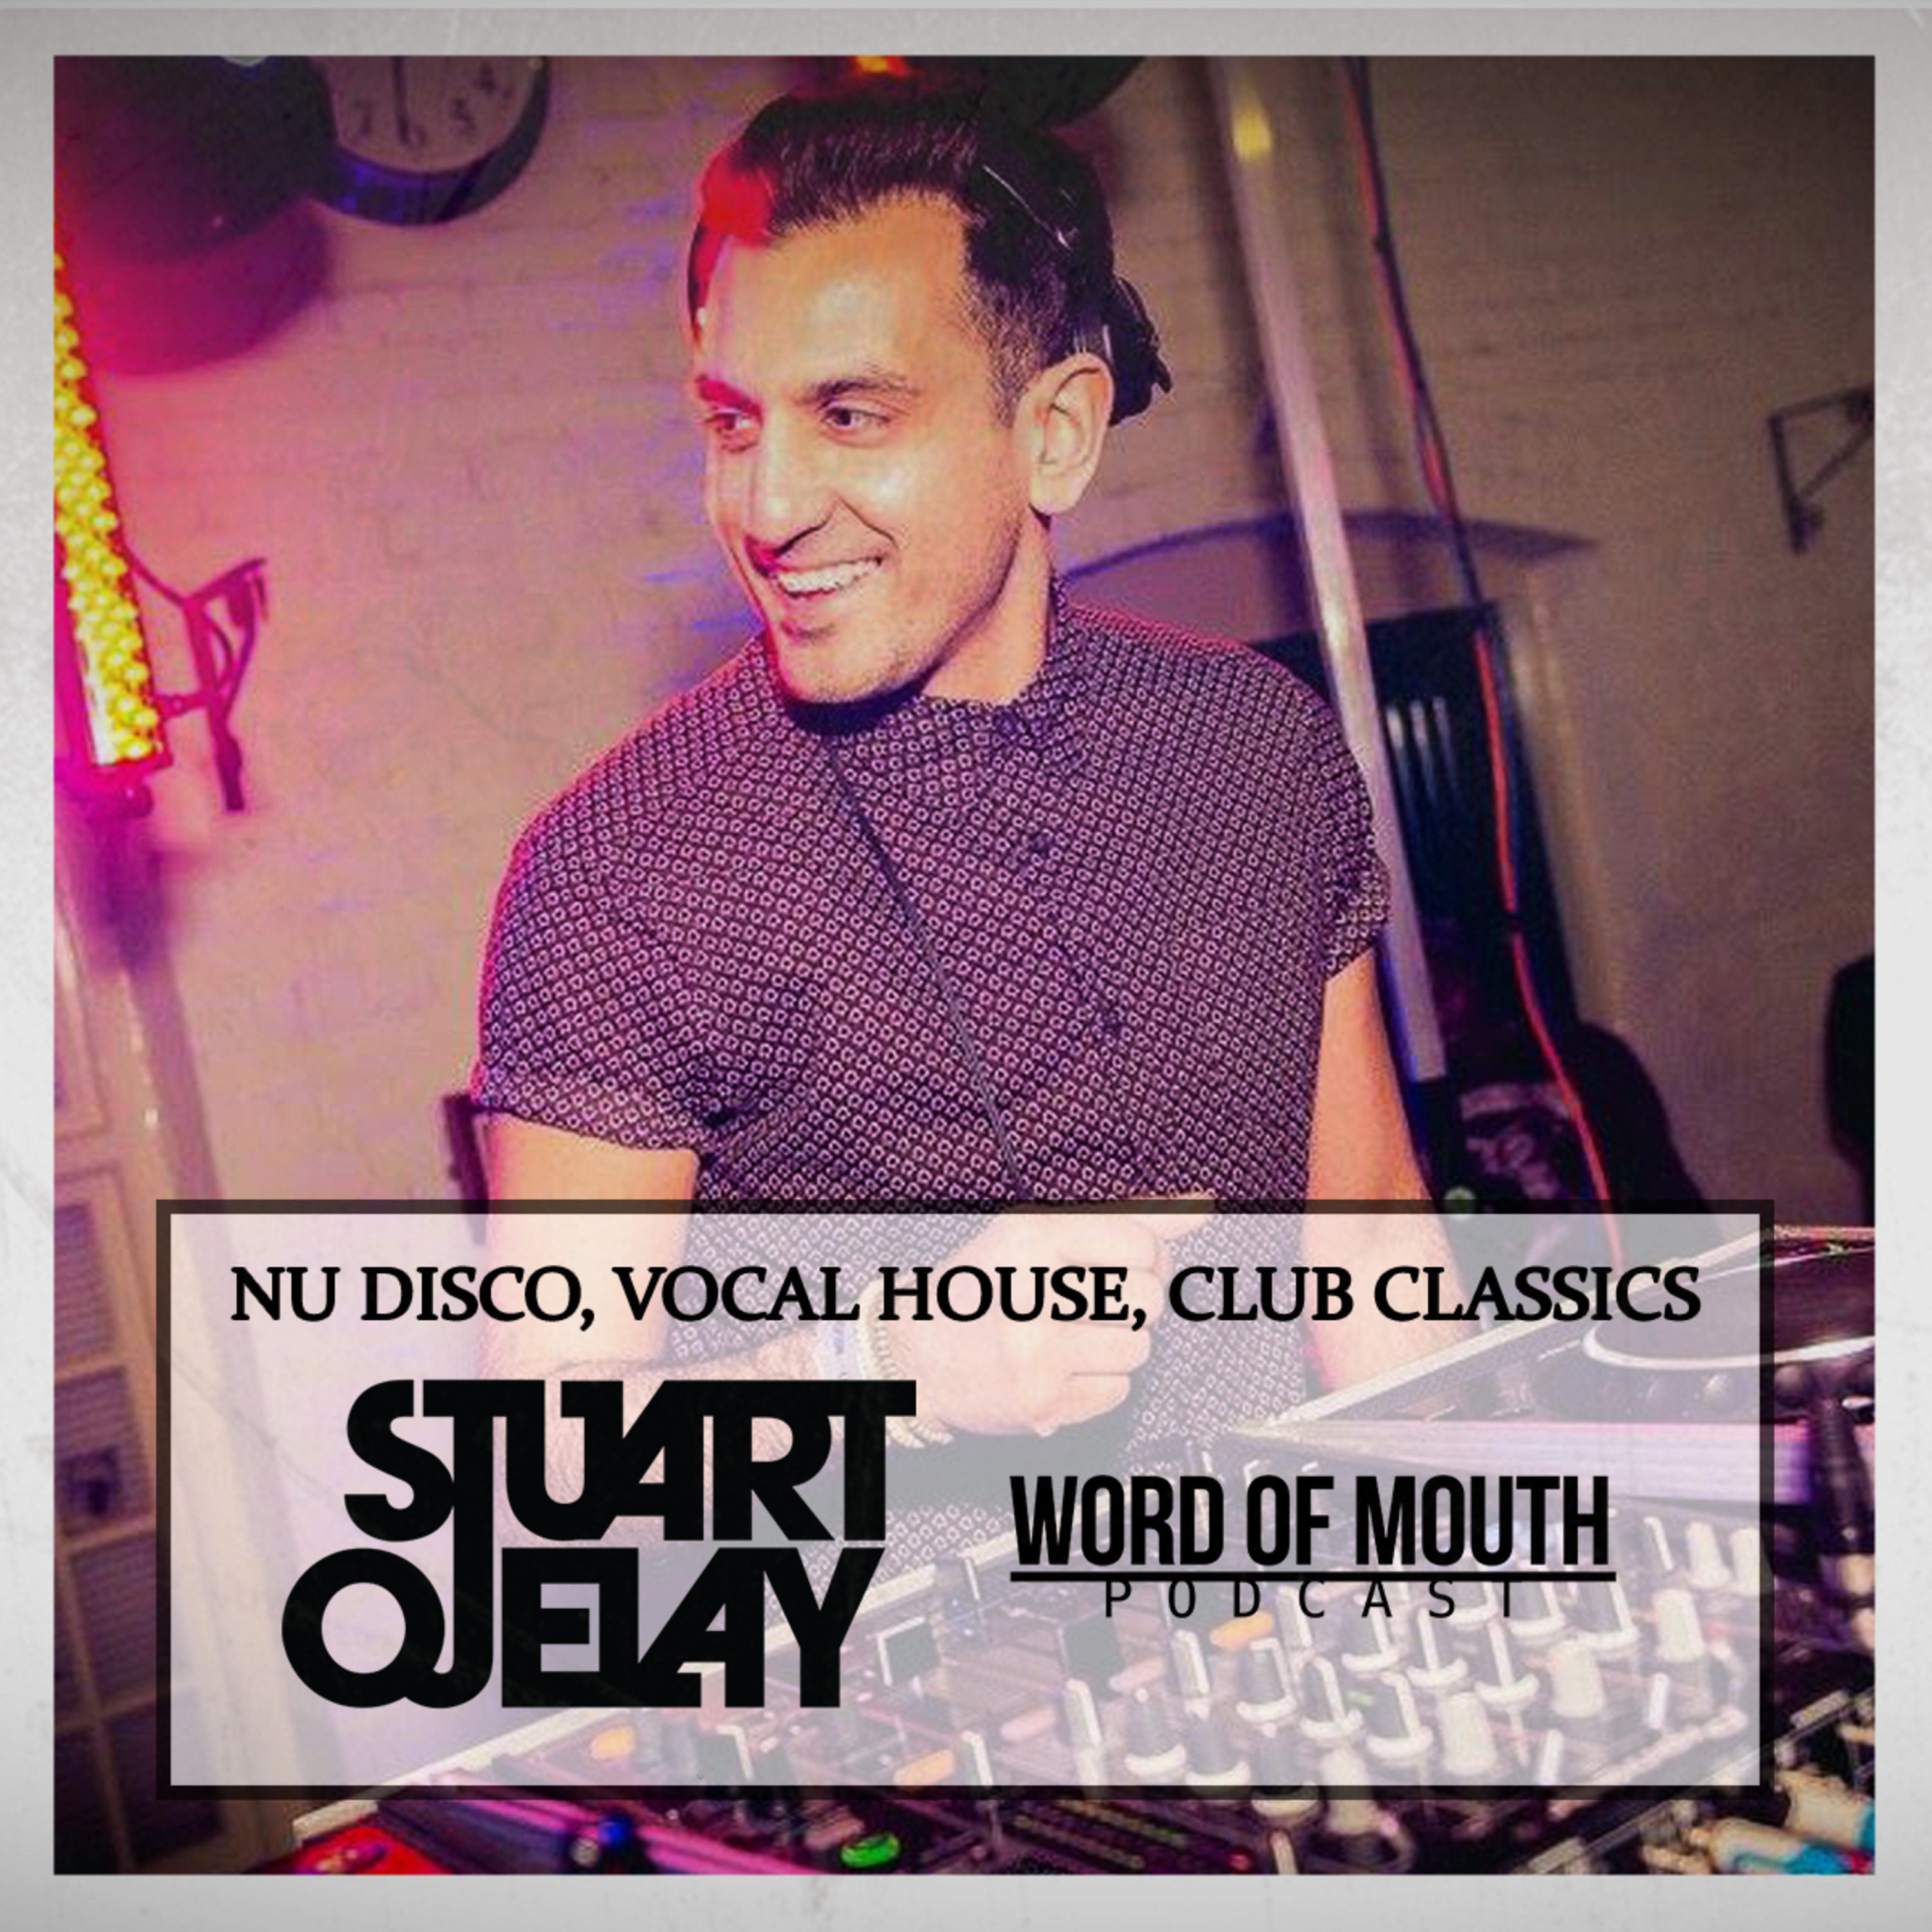 Word of Mouth Podcast with Stuart Ojelay [Nu Disco, Vocal House, Club Classics]